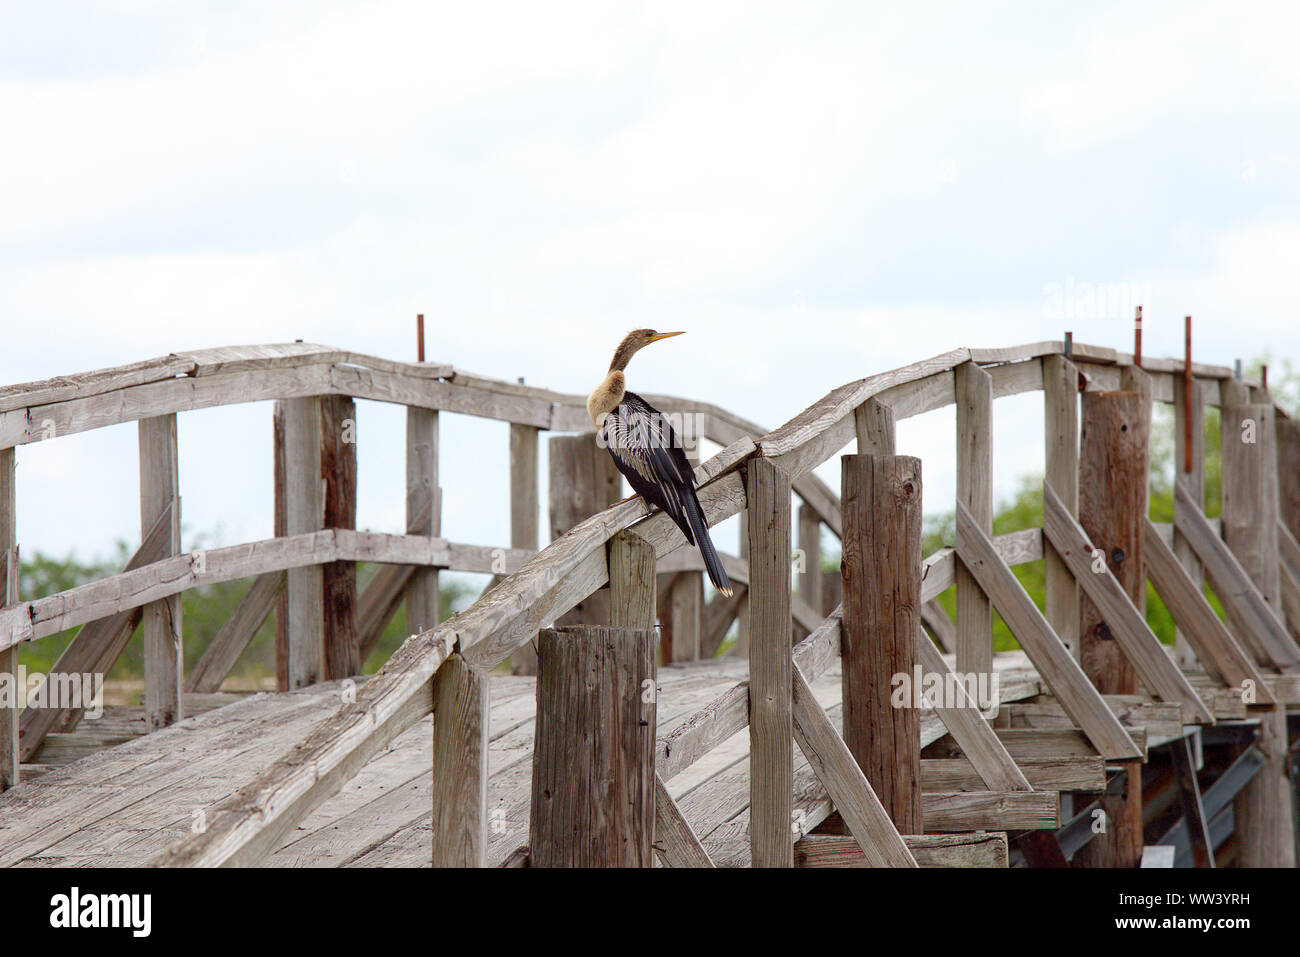 An old wooden footbridge over the Tamiami Canal near Coopertown by U.S. Route 41, (Tamiami Trail), Florida. The bird on the bridge is an Anhinga. Stock Photo